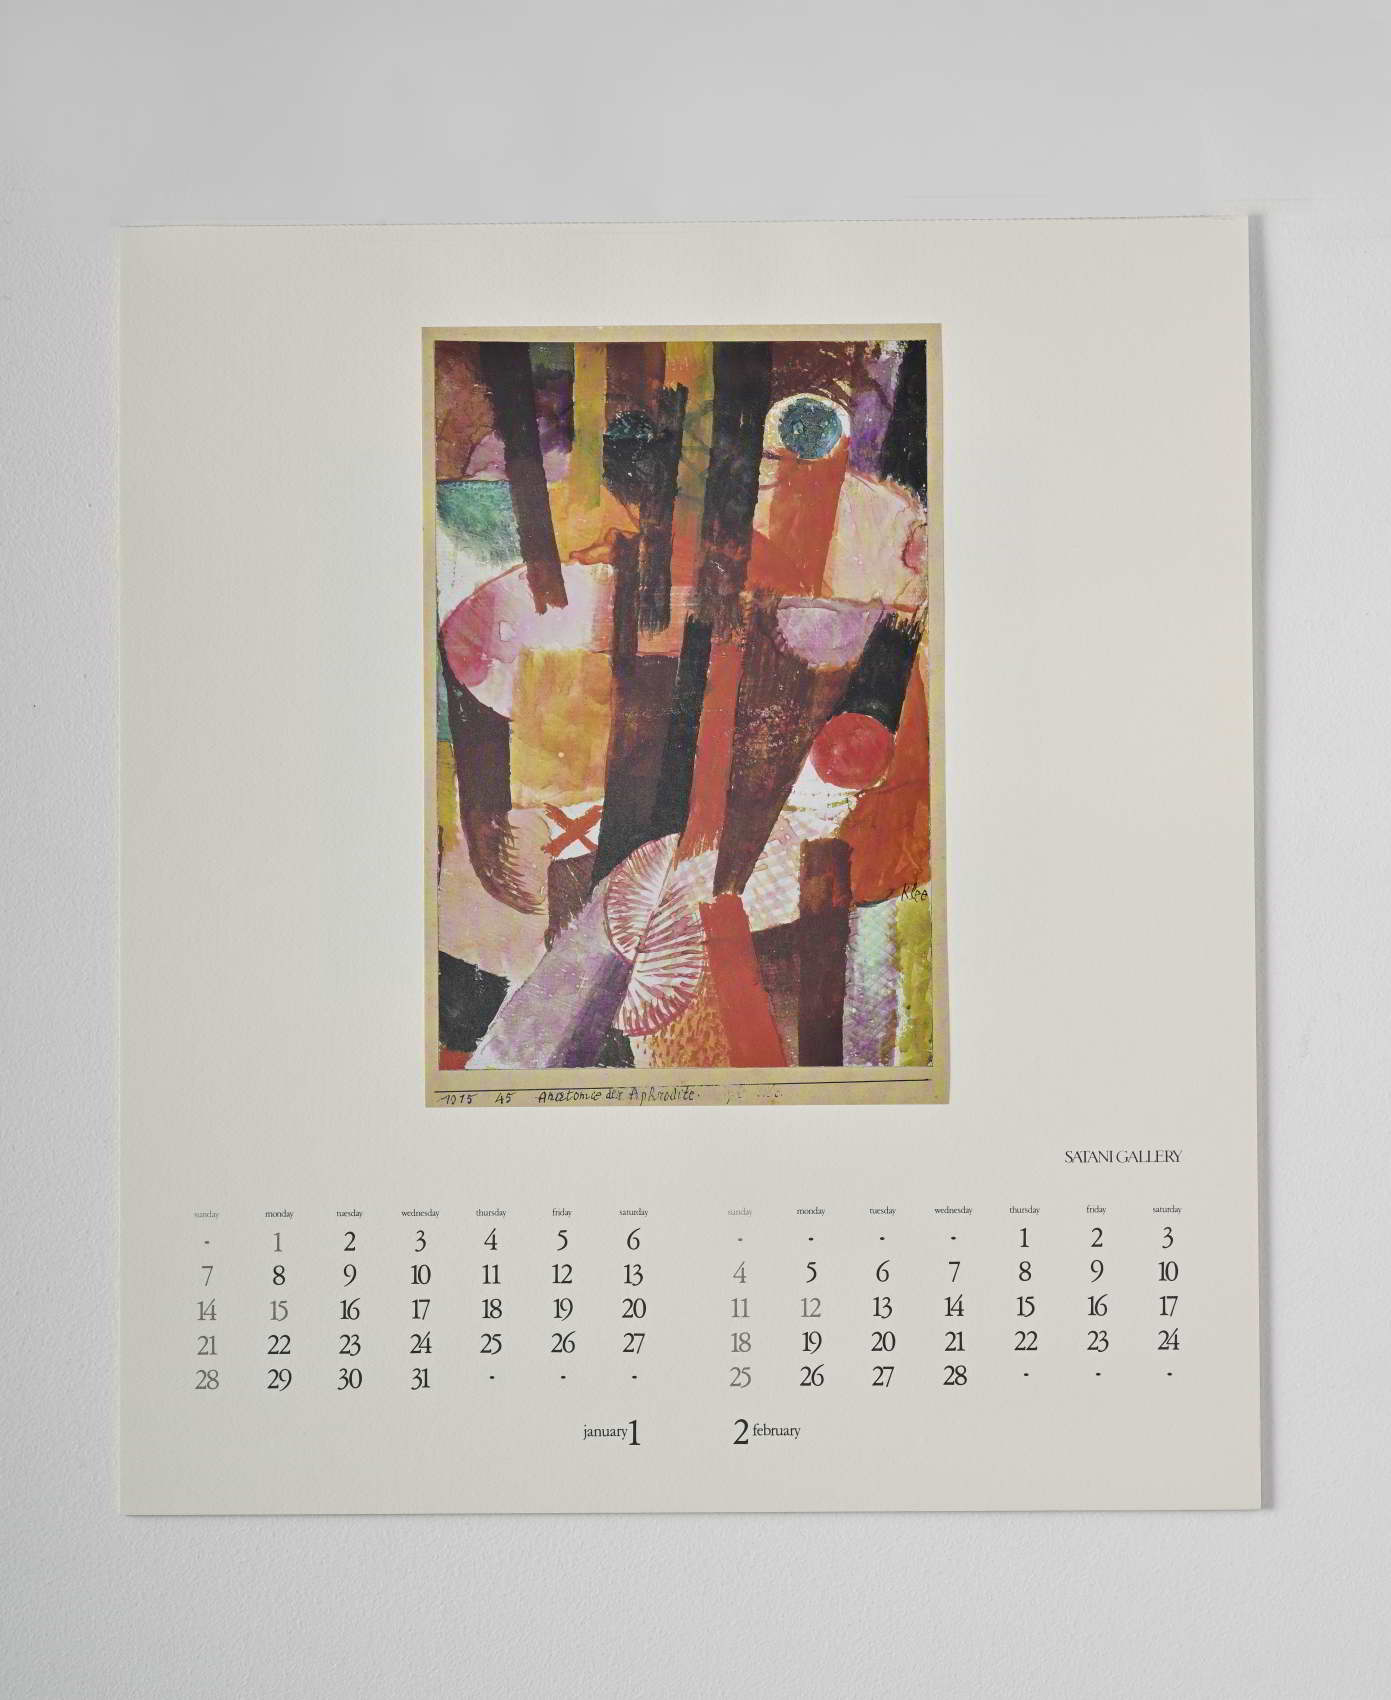 The calendar made for the Klee exhibition.